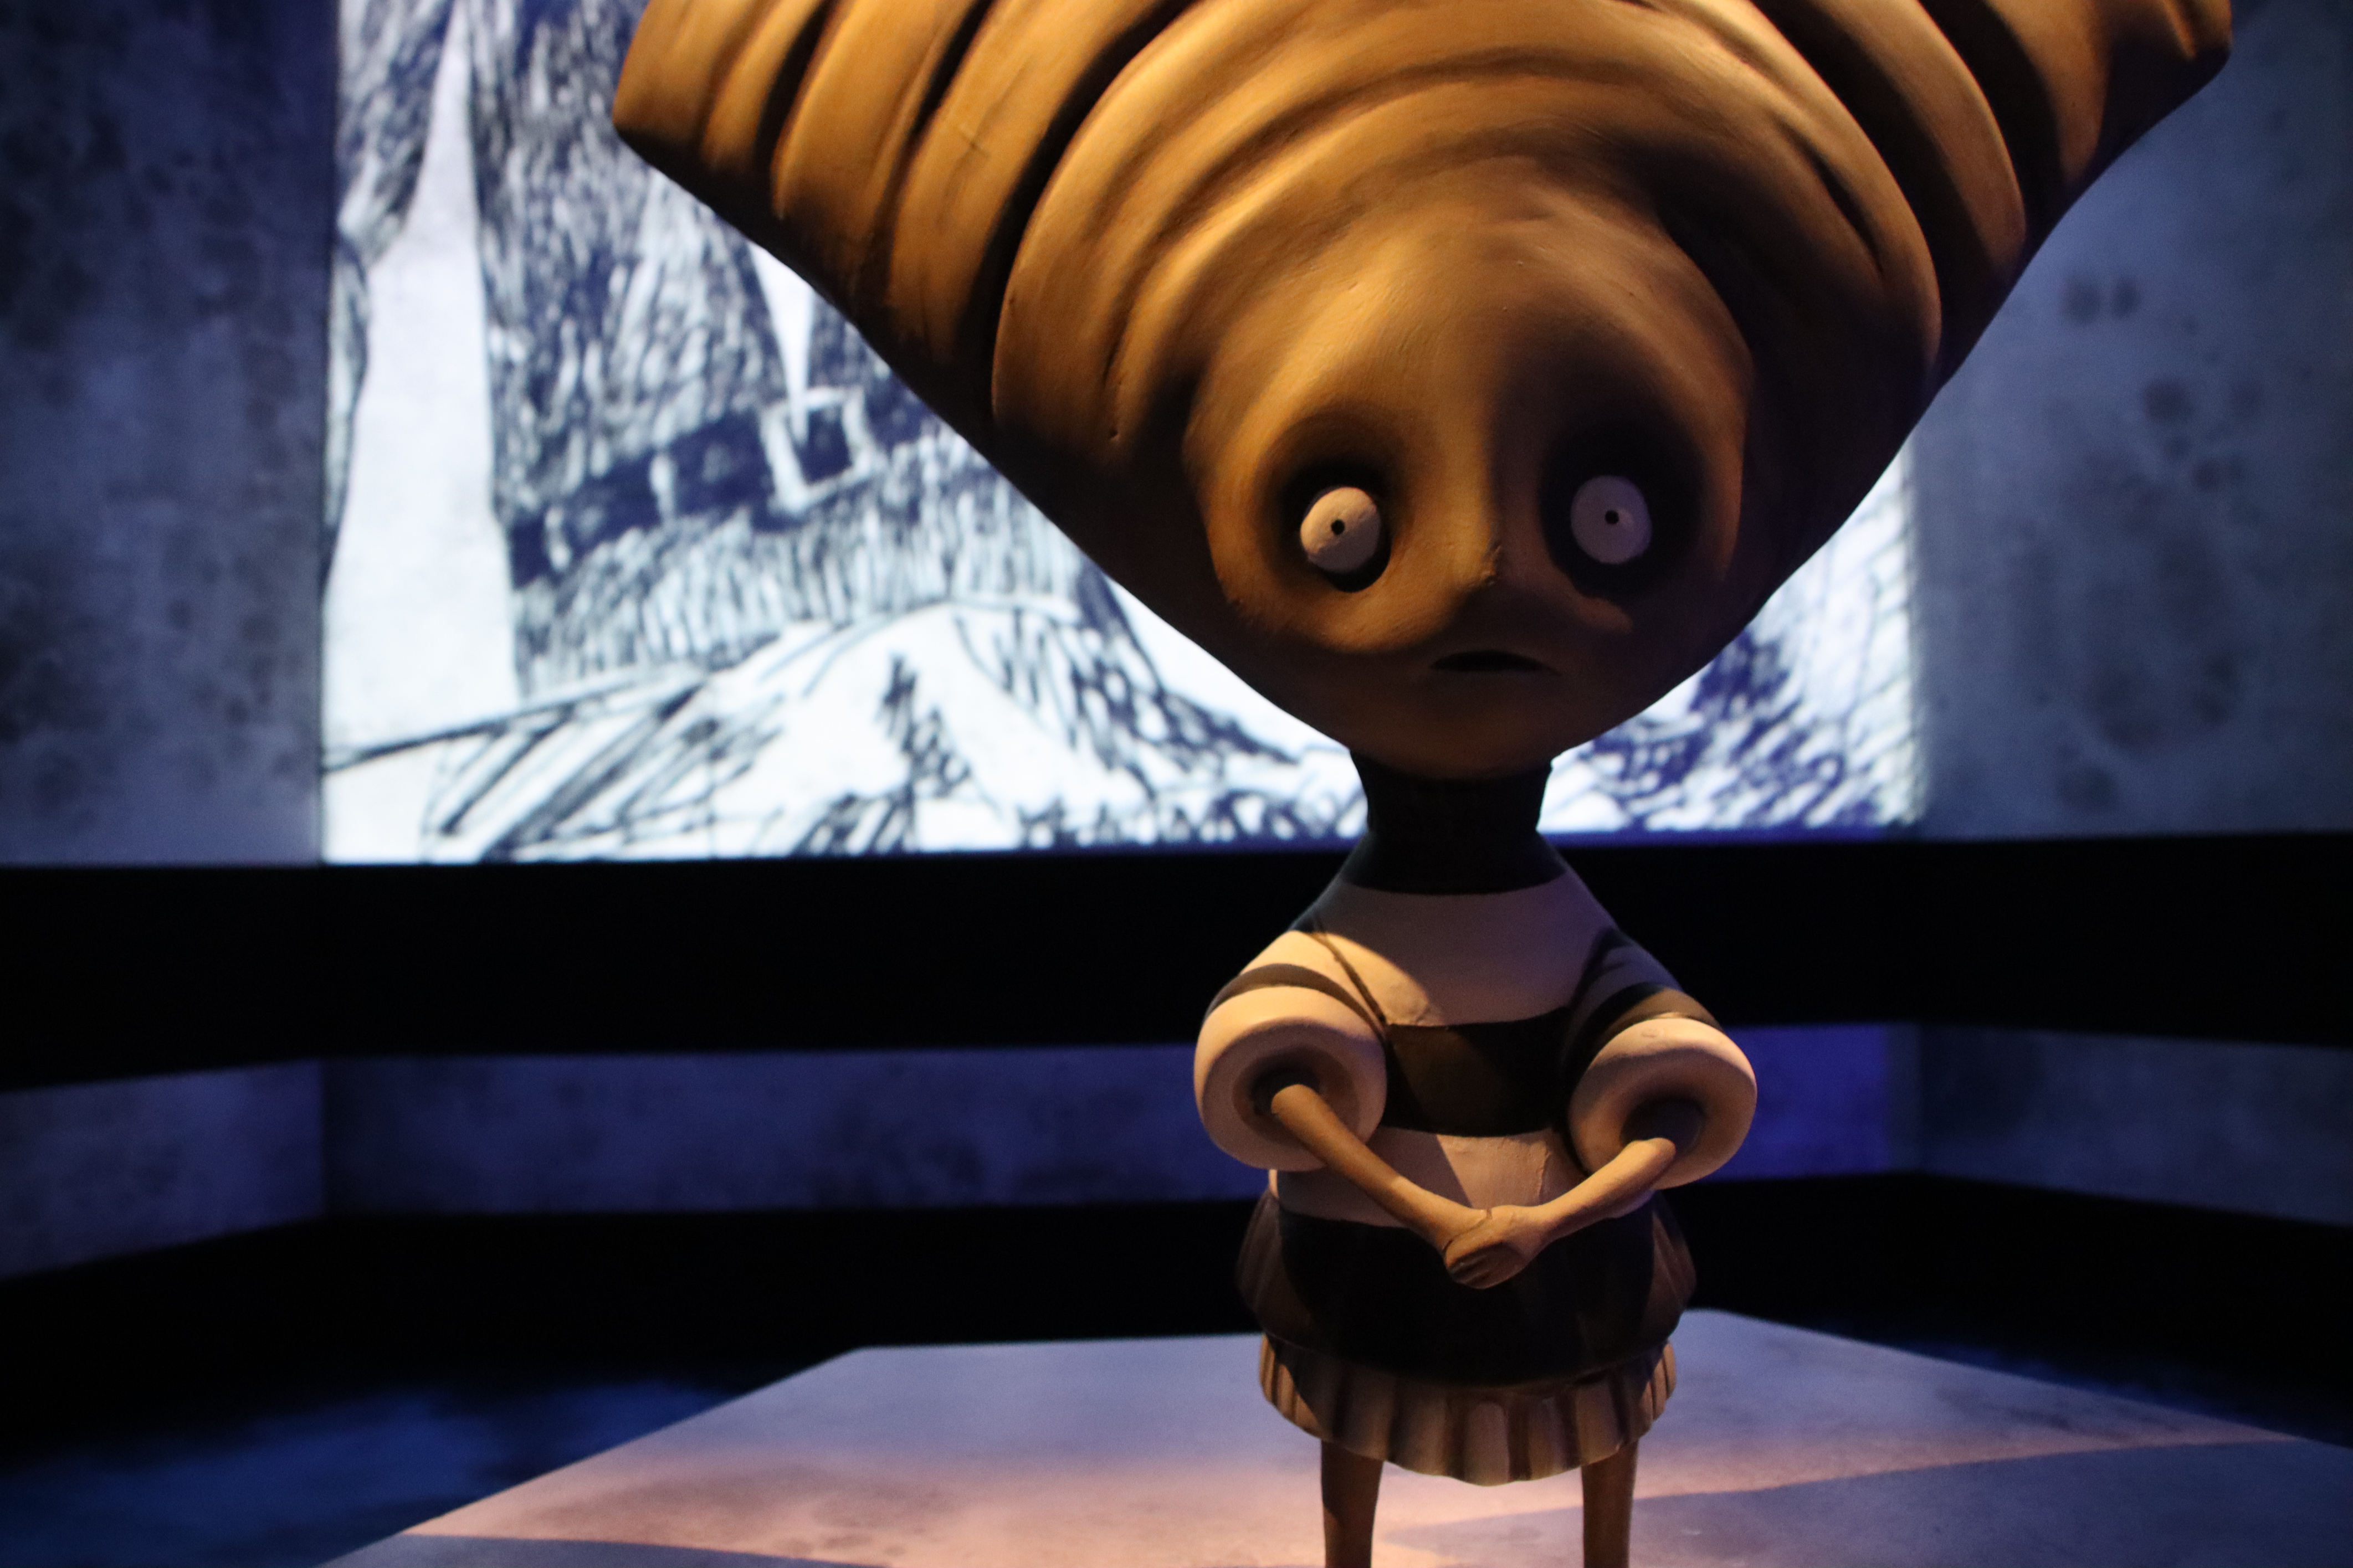 One of the figures featured in Tim Burton's Labyrinth, exhibited in Brussels